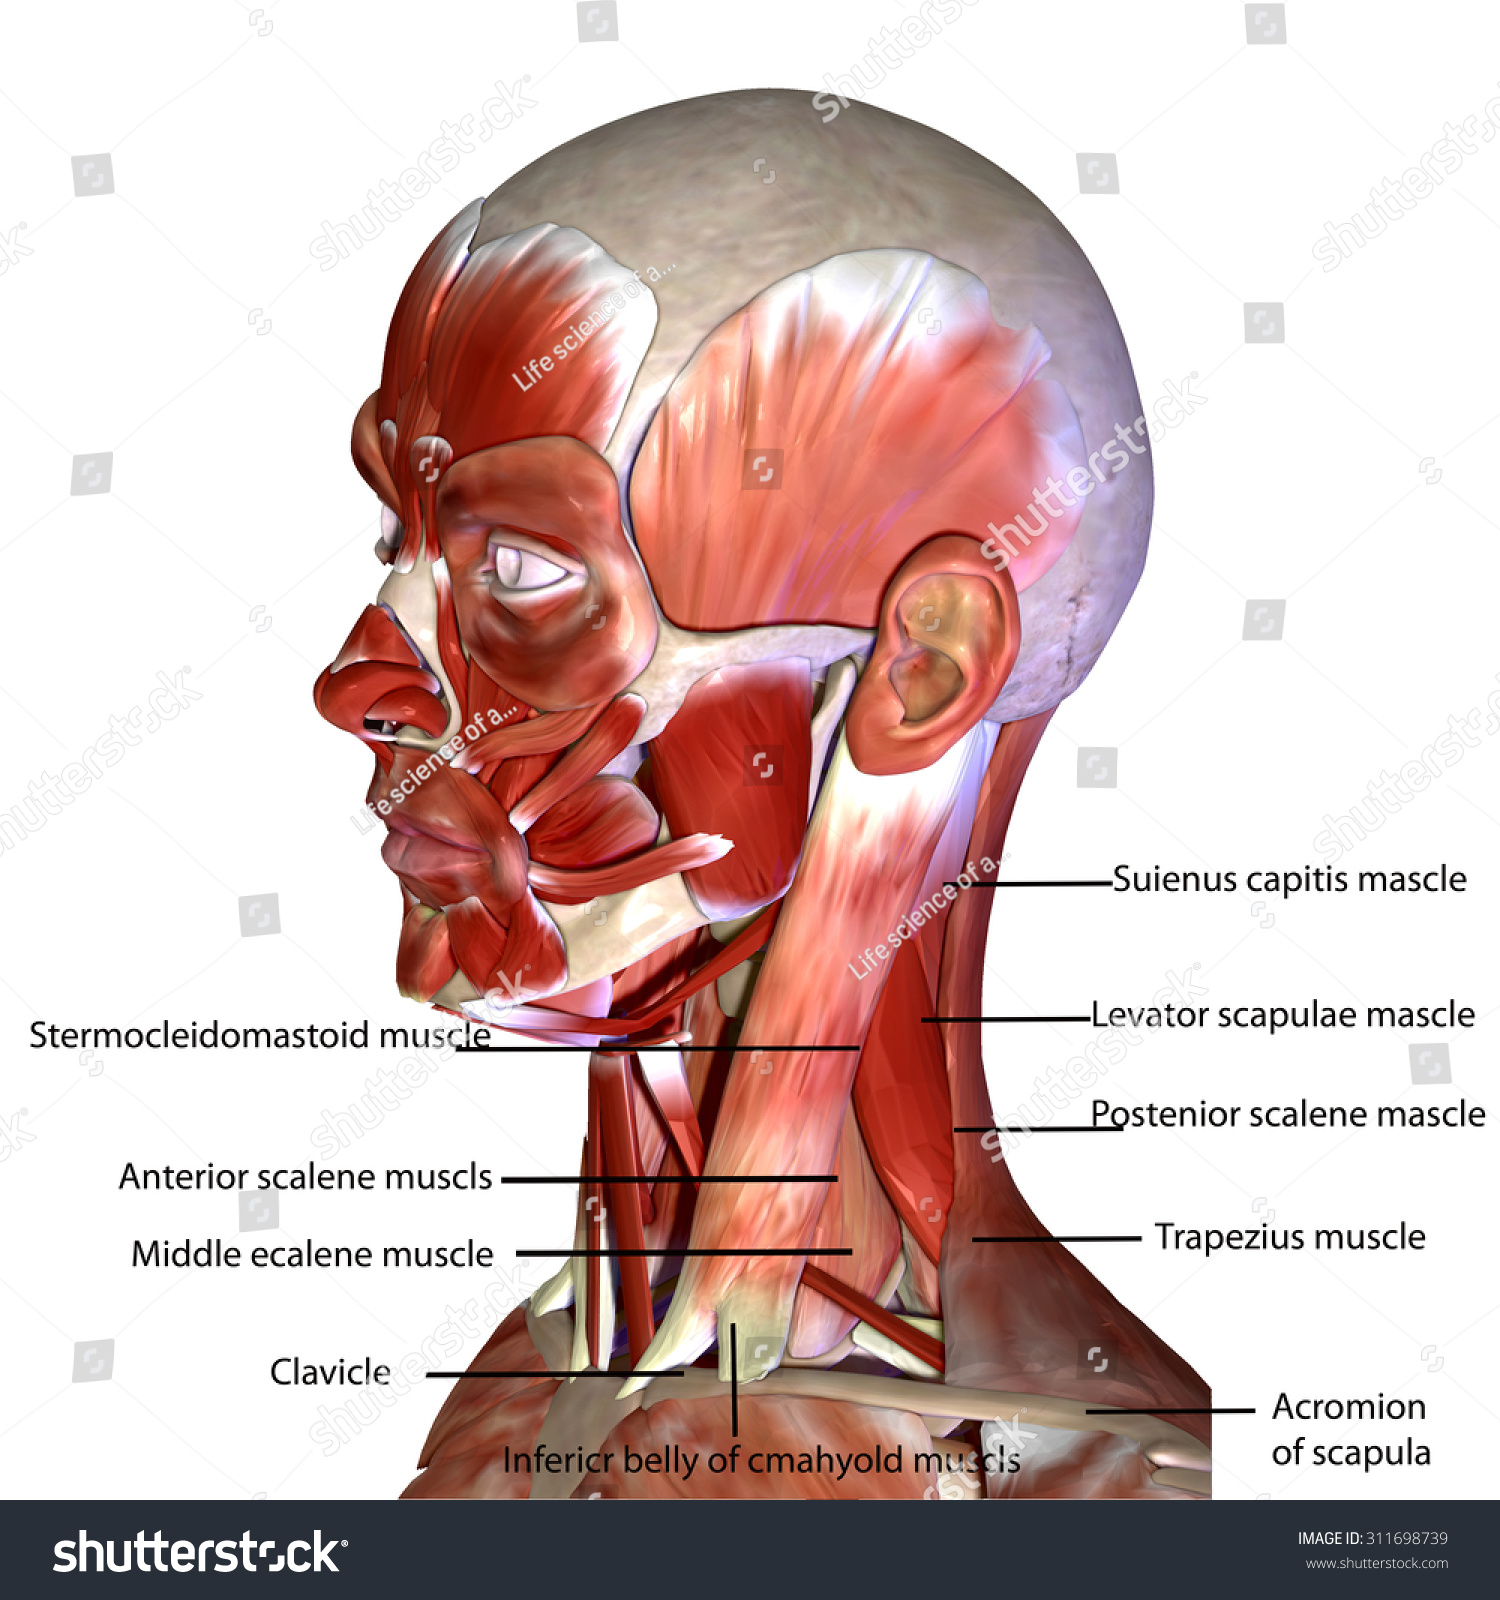 Names Of Human Muscles With Illustration / Muscle extending from the